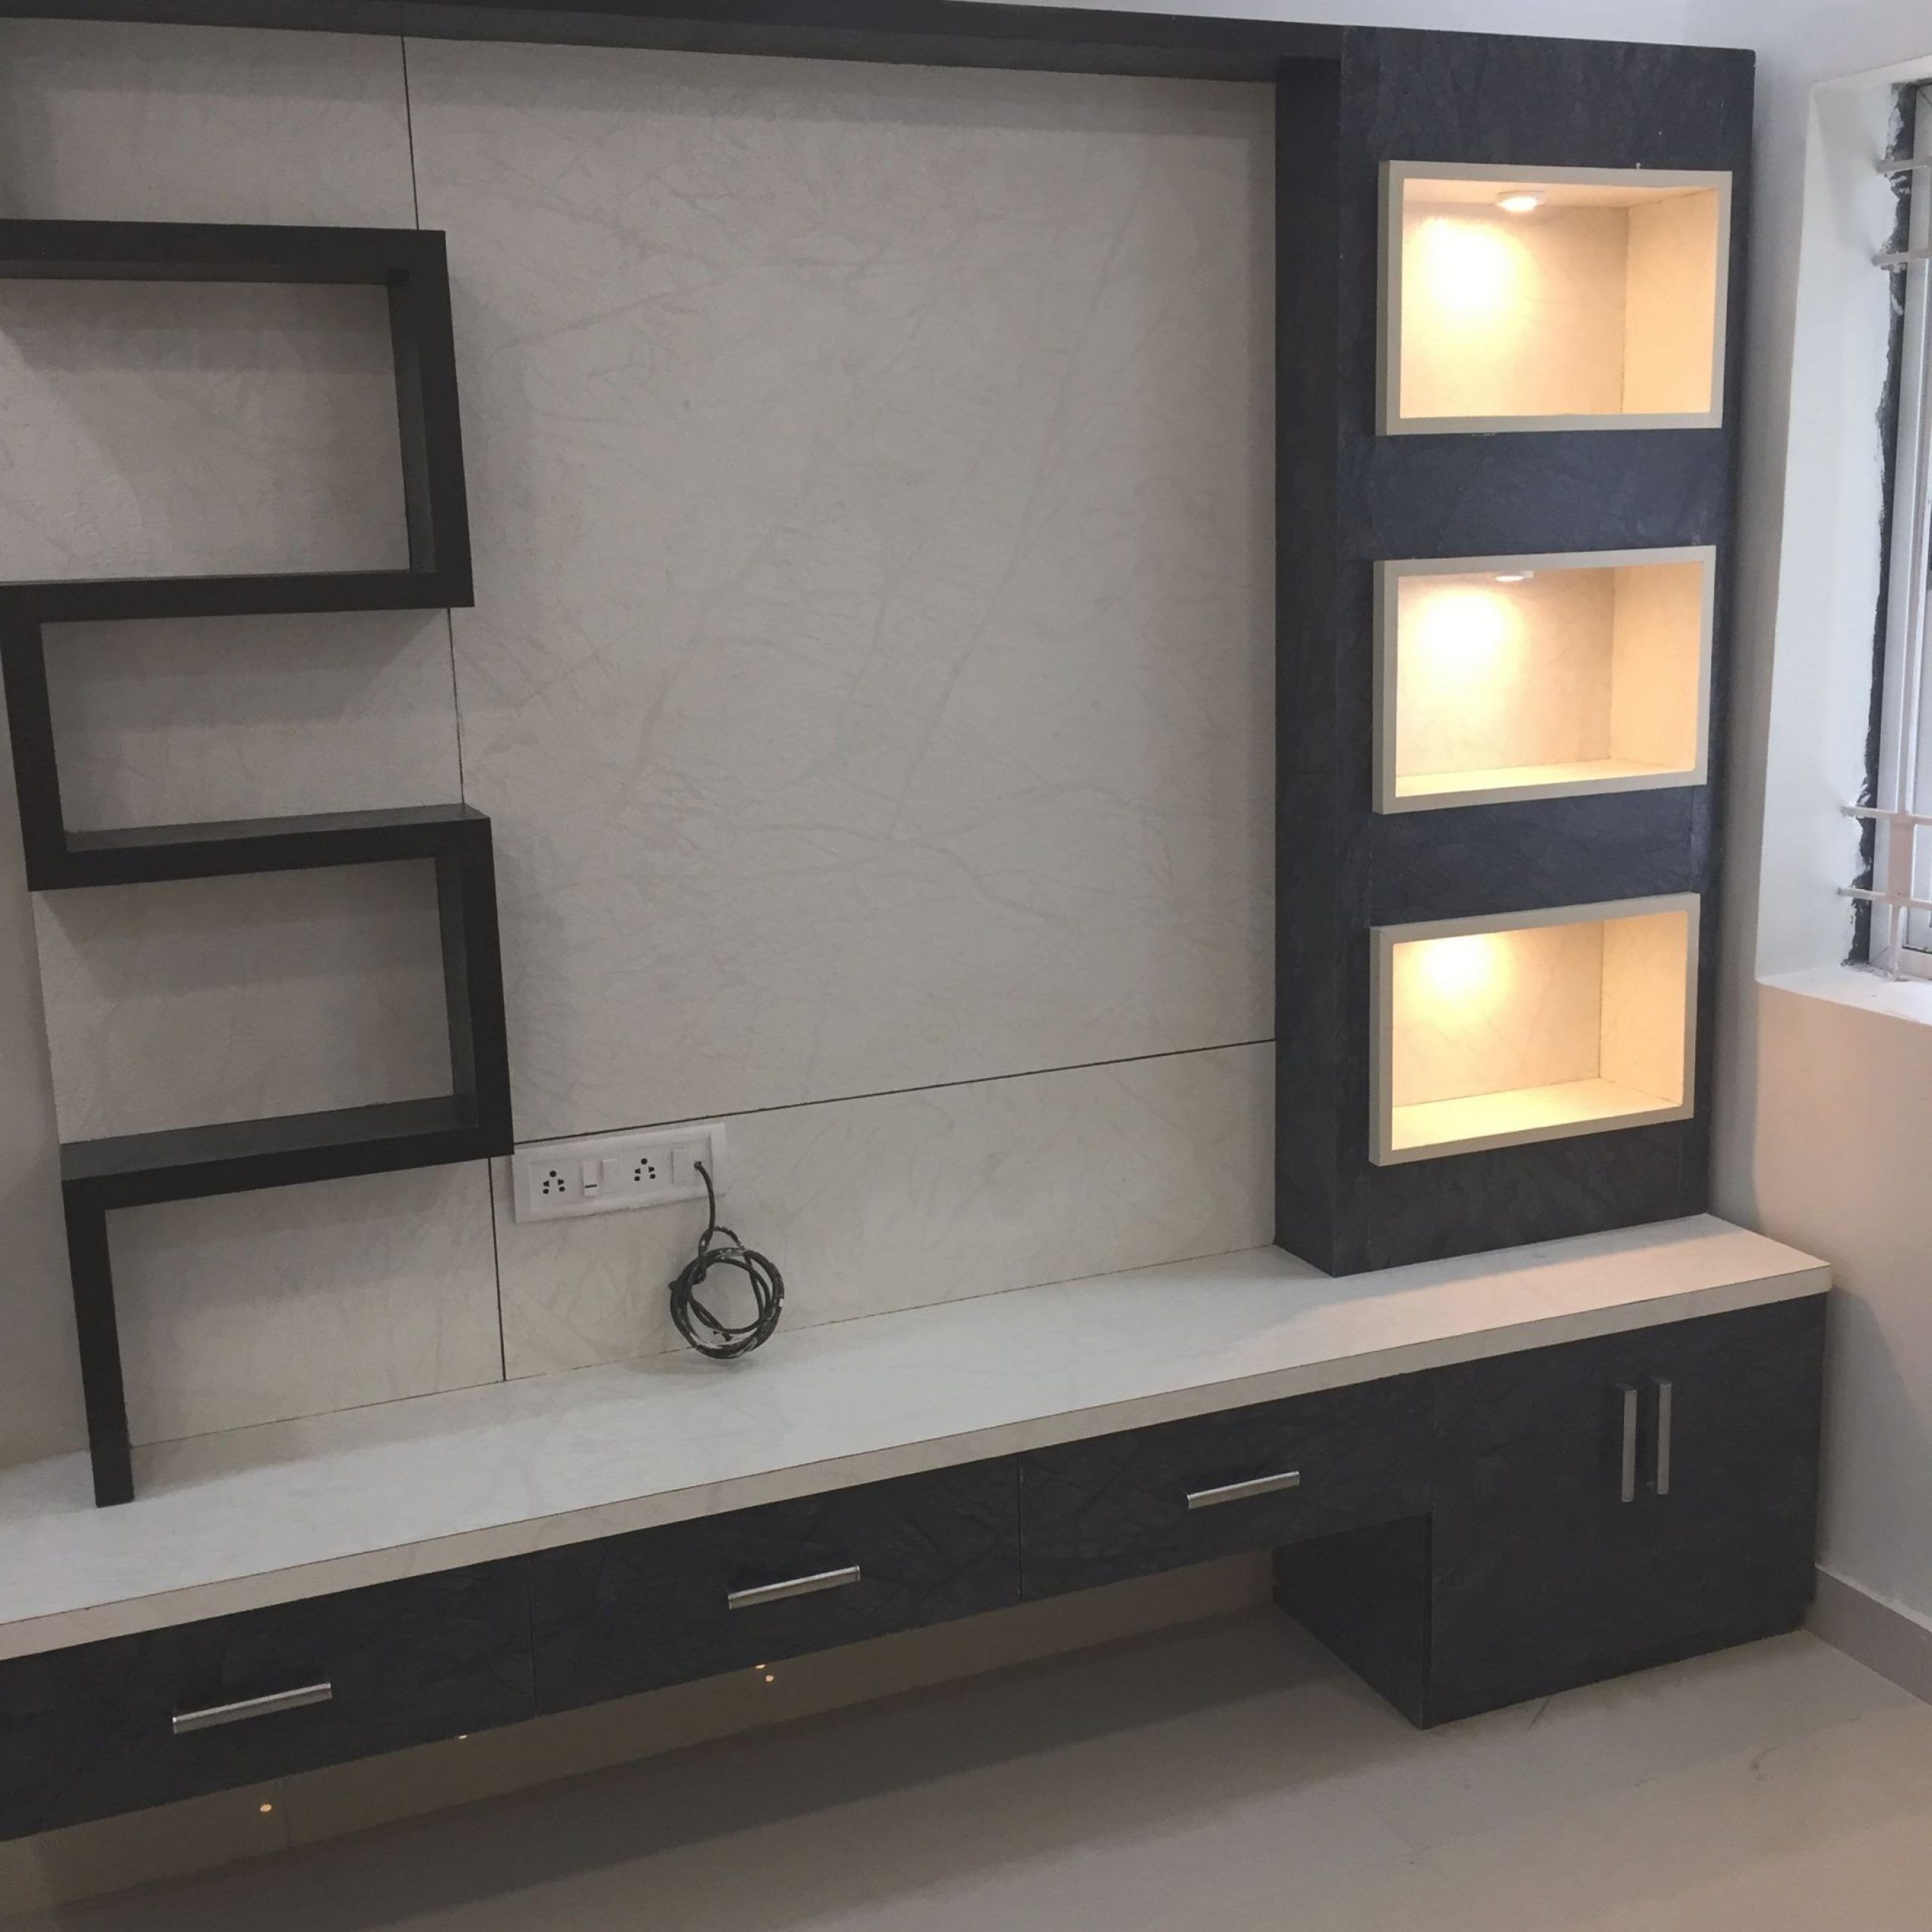 Tv Unit | Tv Unit In 2019 | Modern Tv Wall Units, Modern In Modern Tv Units (View 10 of 15)